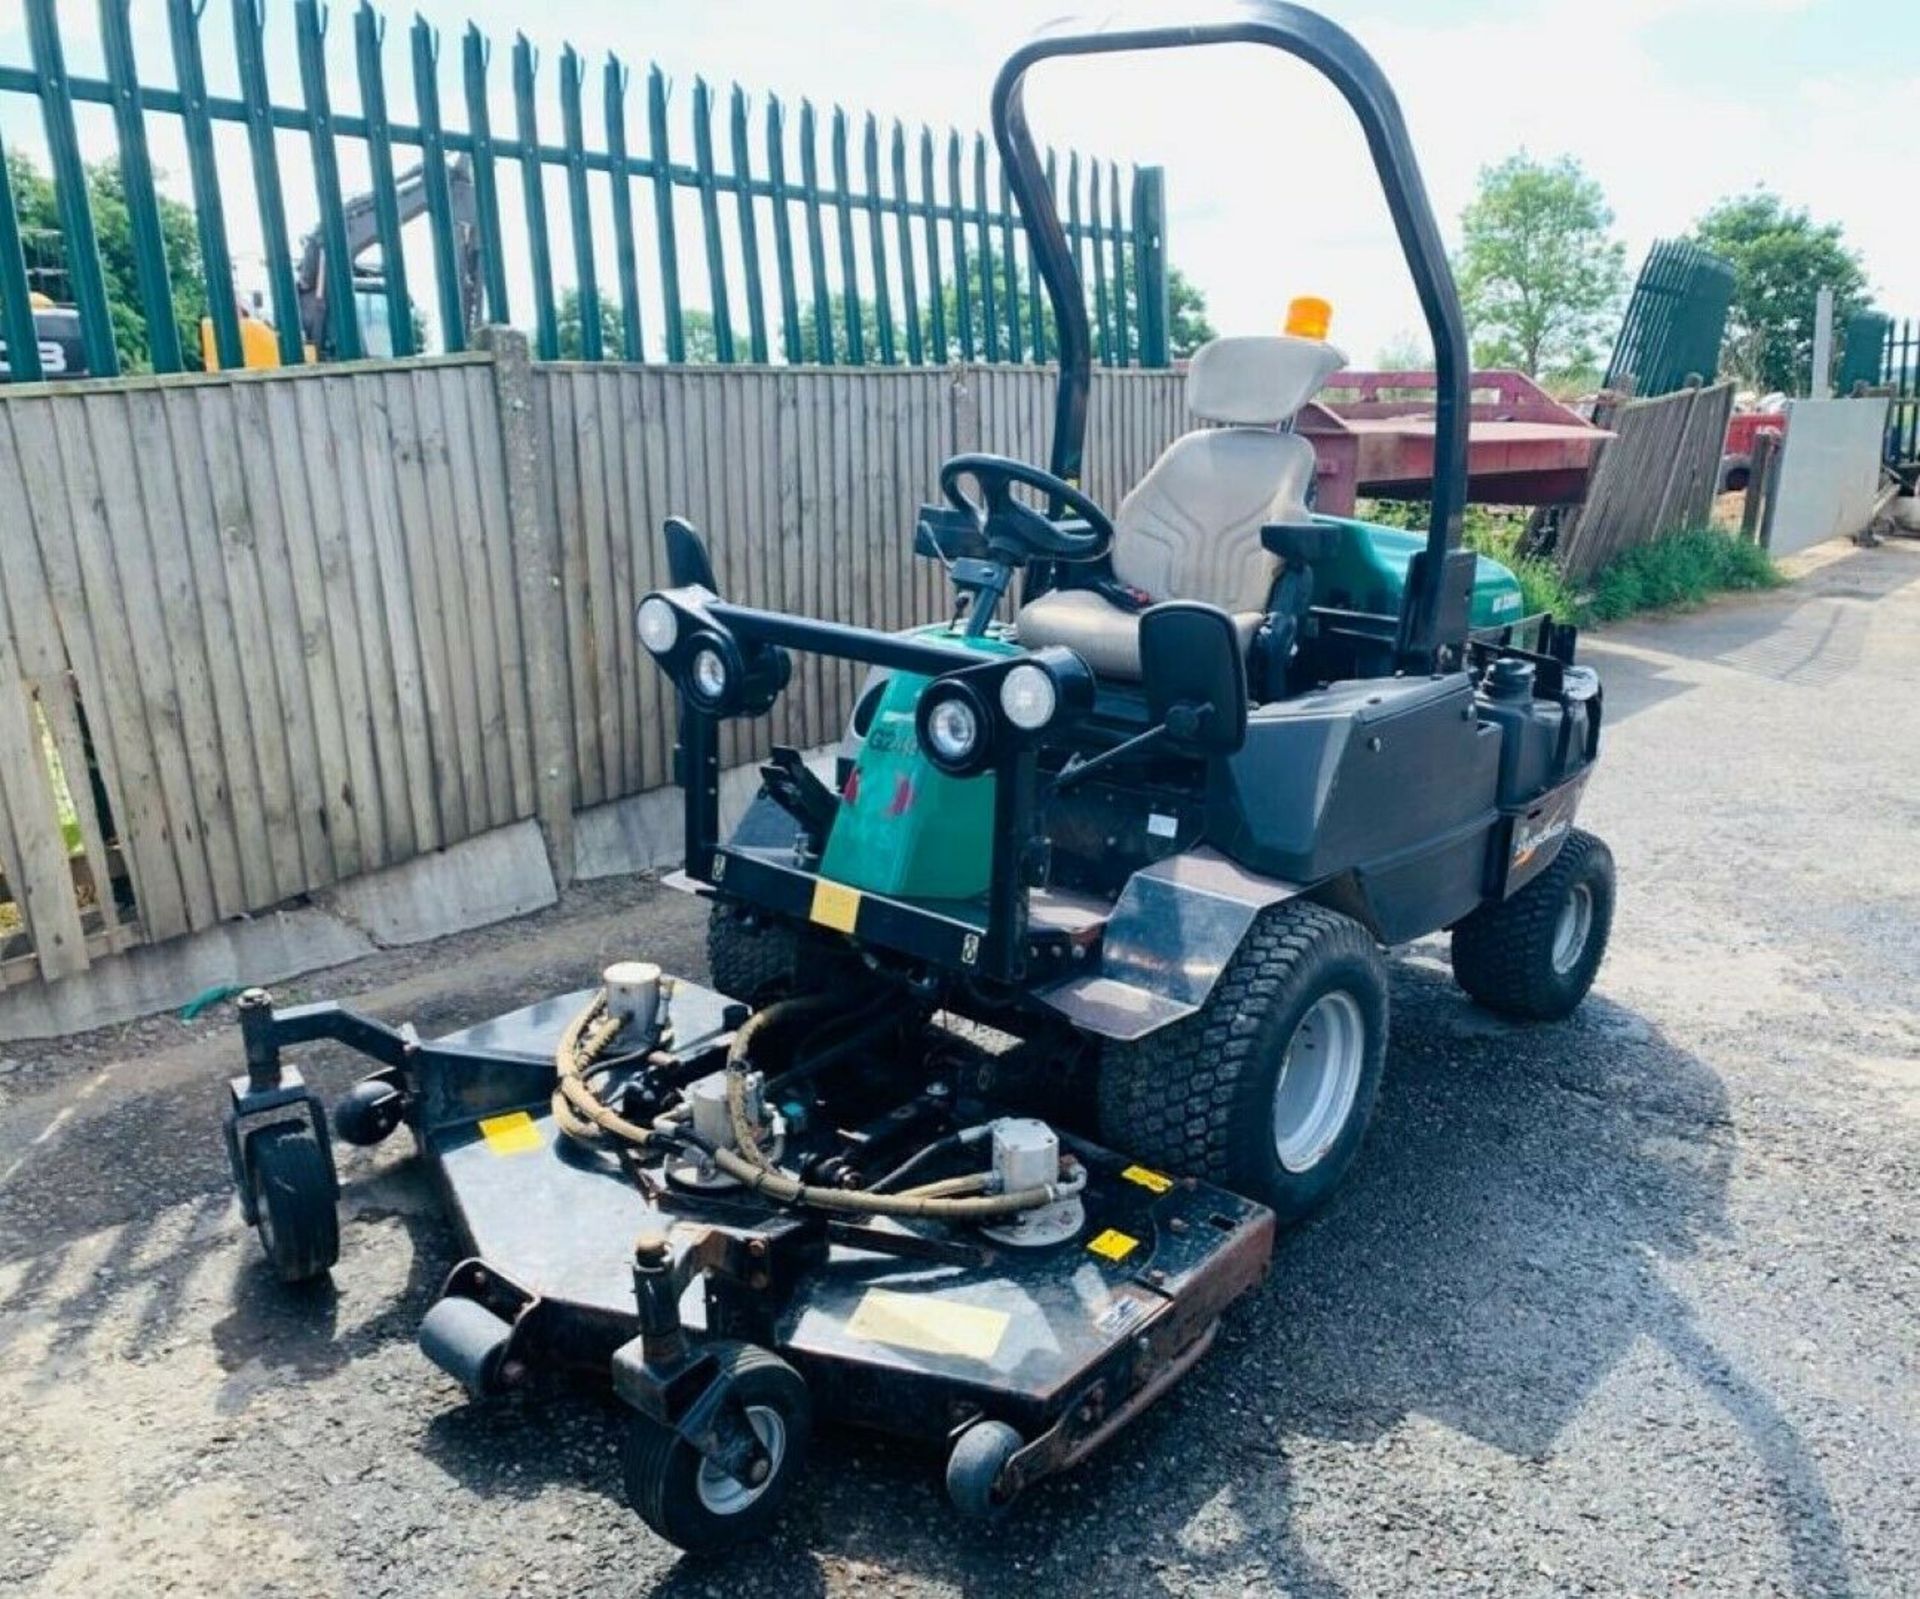 Ransomes Rotary Mower HR3300T 20094 WD - Image 12 of 12